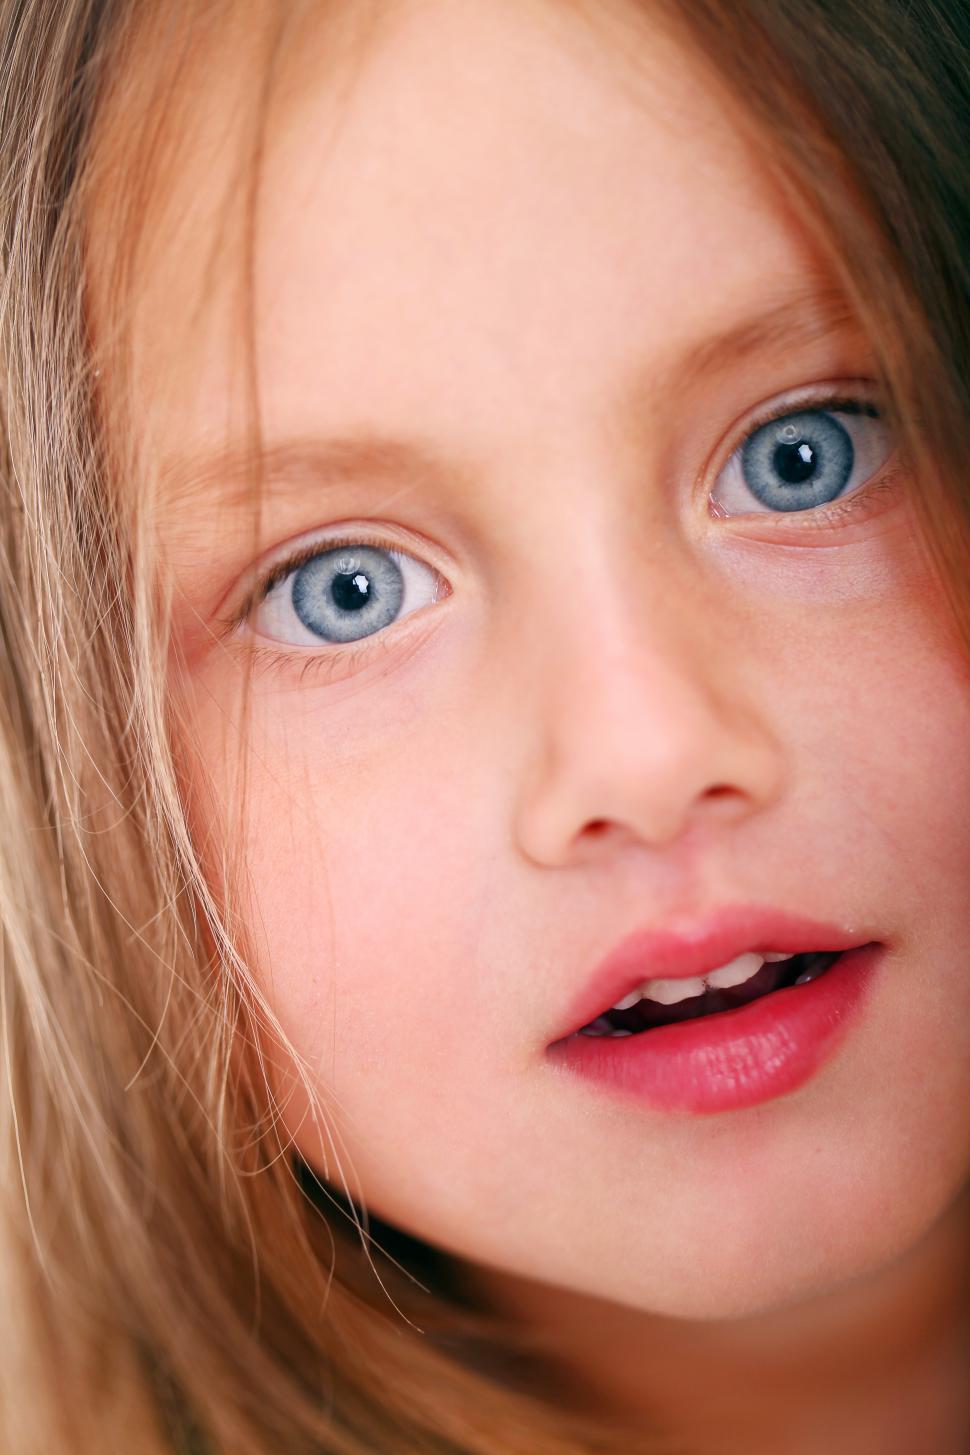 Free Stock Photo of Young girl with blue eyes, close up | Download ...